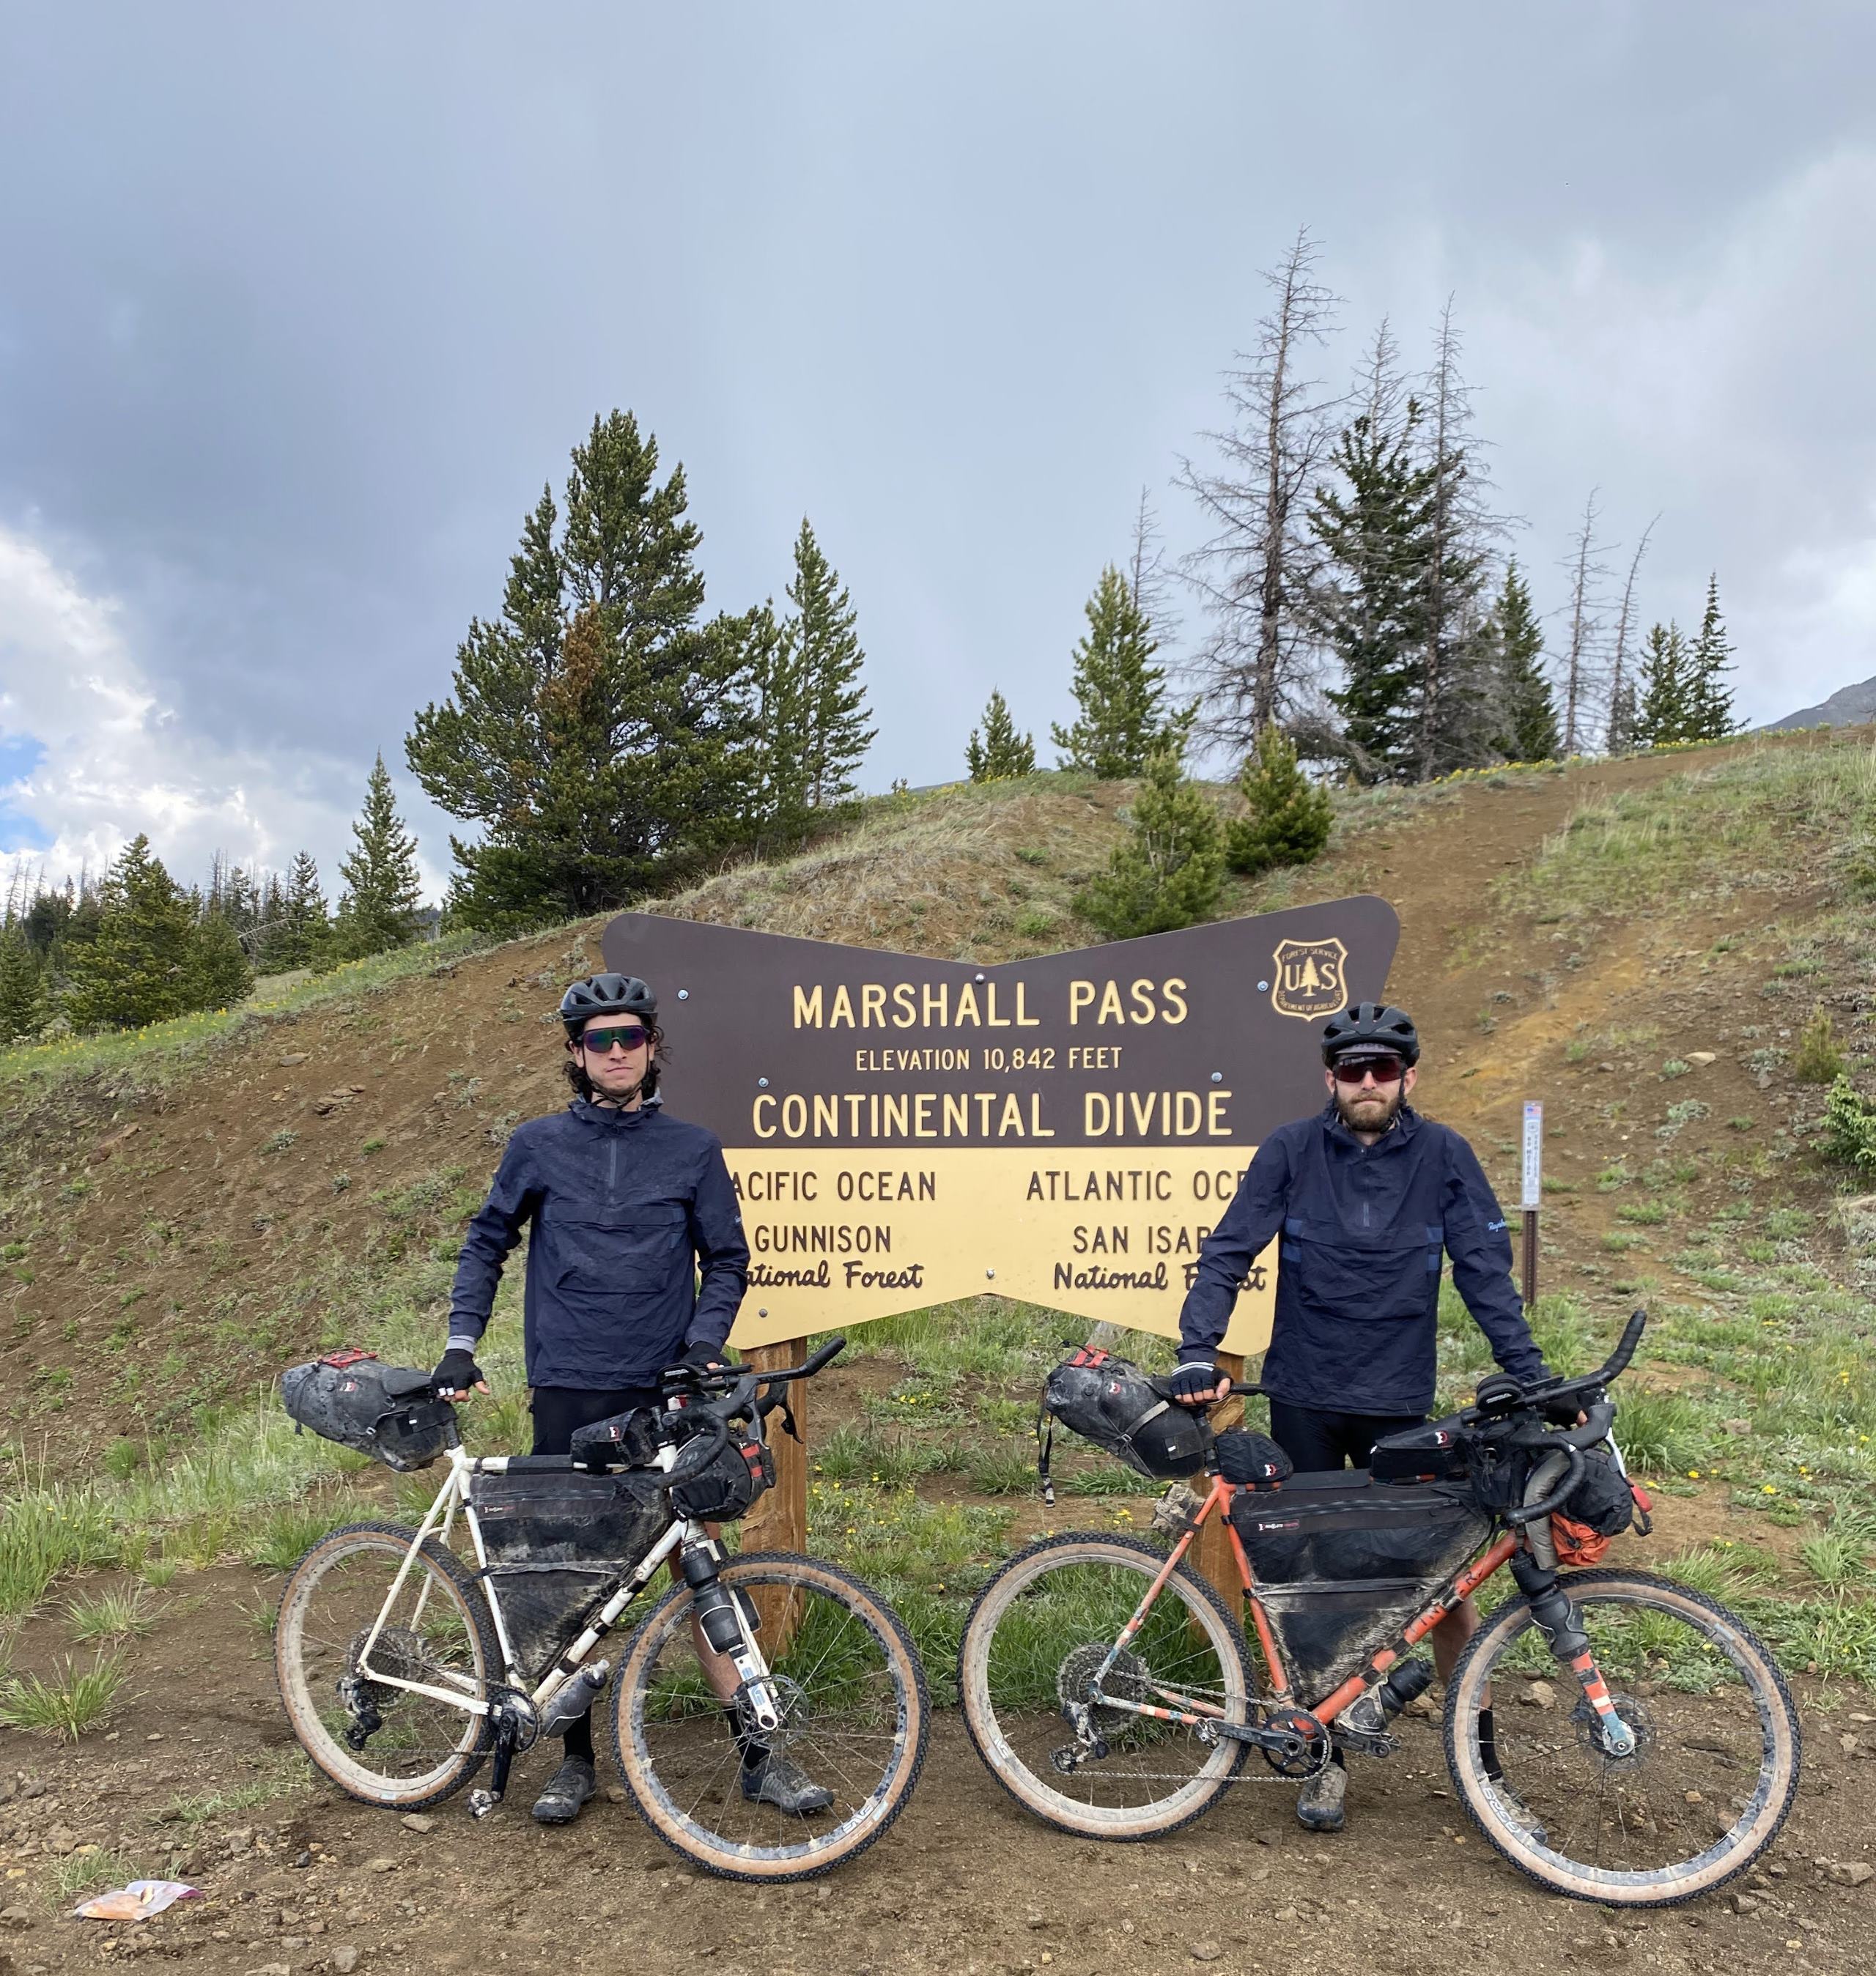 Patrick (right) and his friend Tyler Gatlin pause at Marshall Pass while participating in the Tour Divide race. All the gear and provisions for their 25-day trek are strapped onto their bikes.